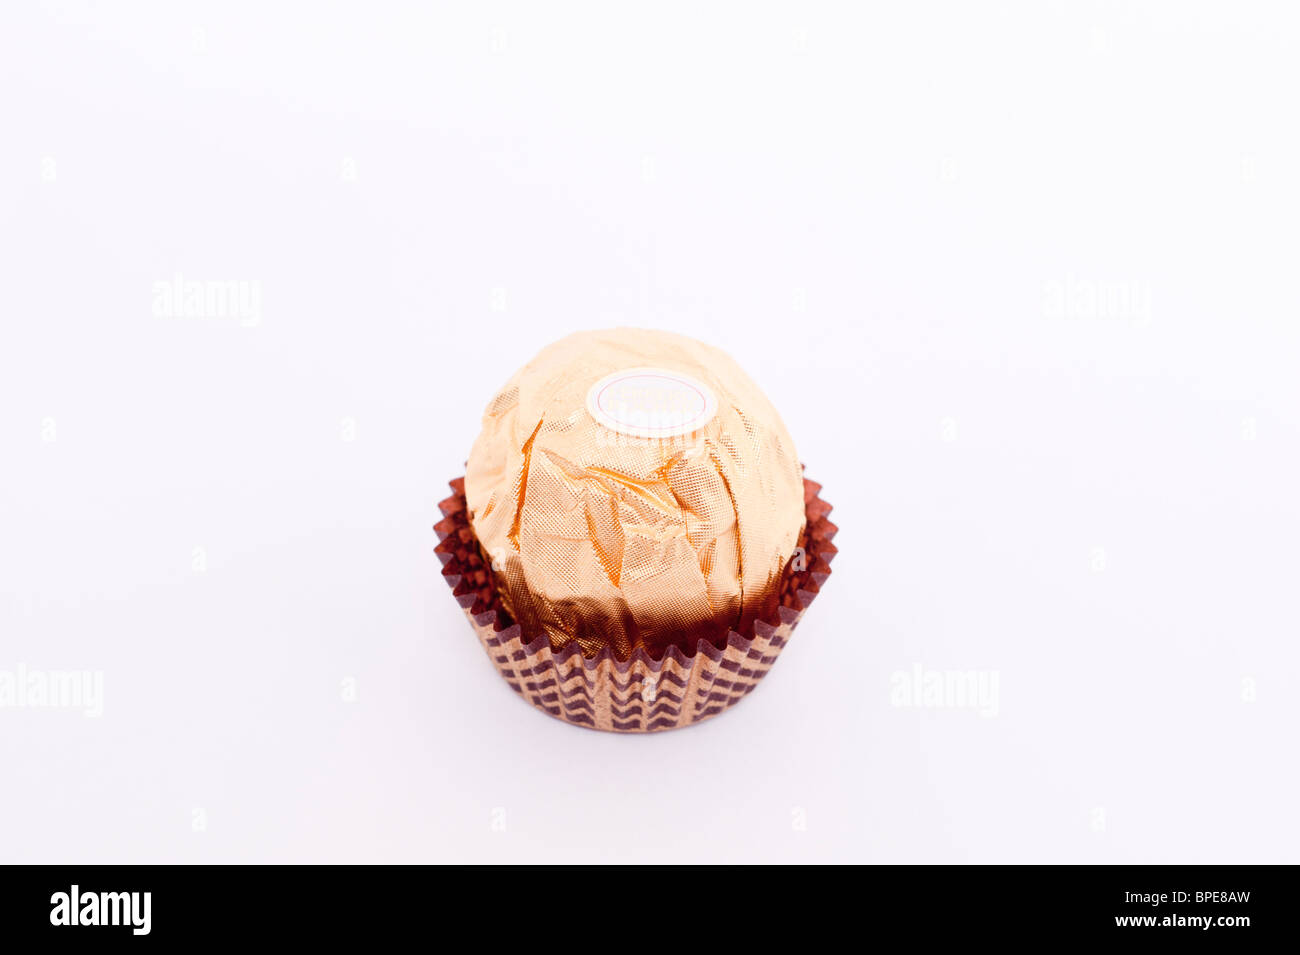 A close up cutout of a Ferrero Rocher chocolate on a white background Stock Photo